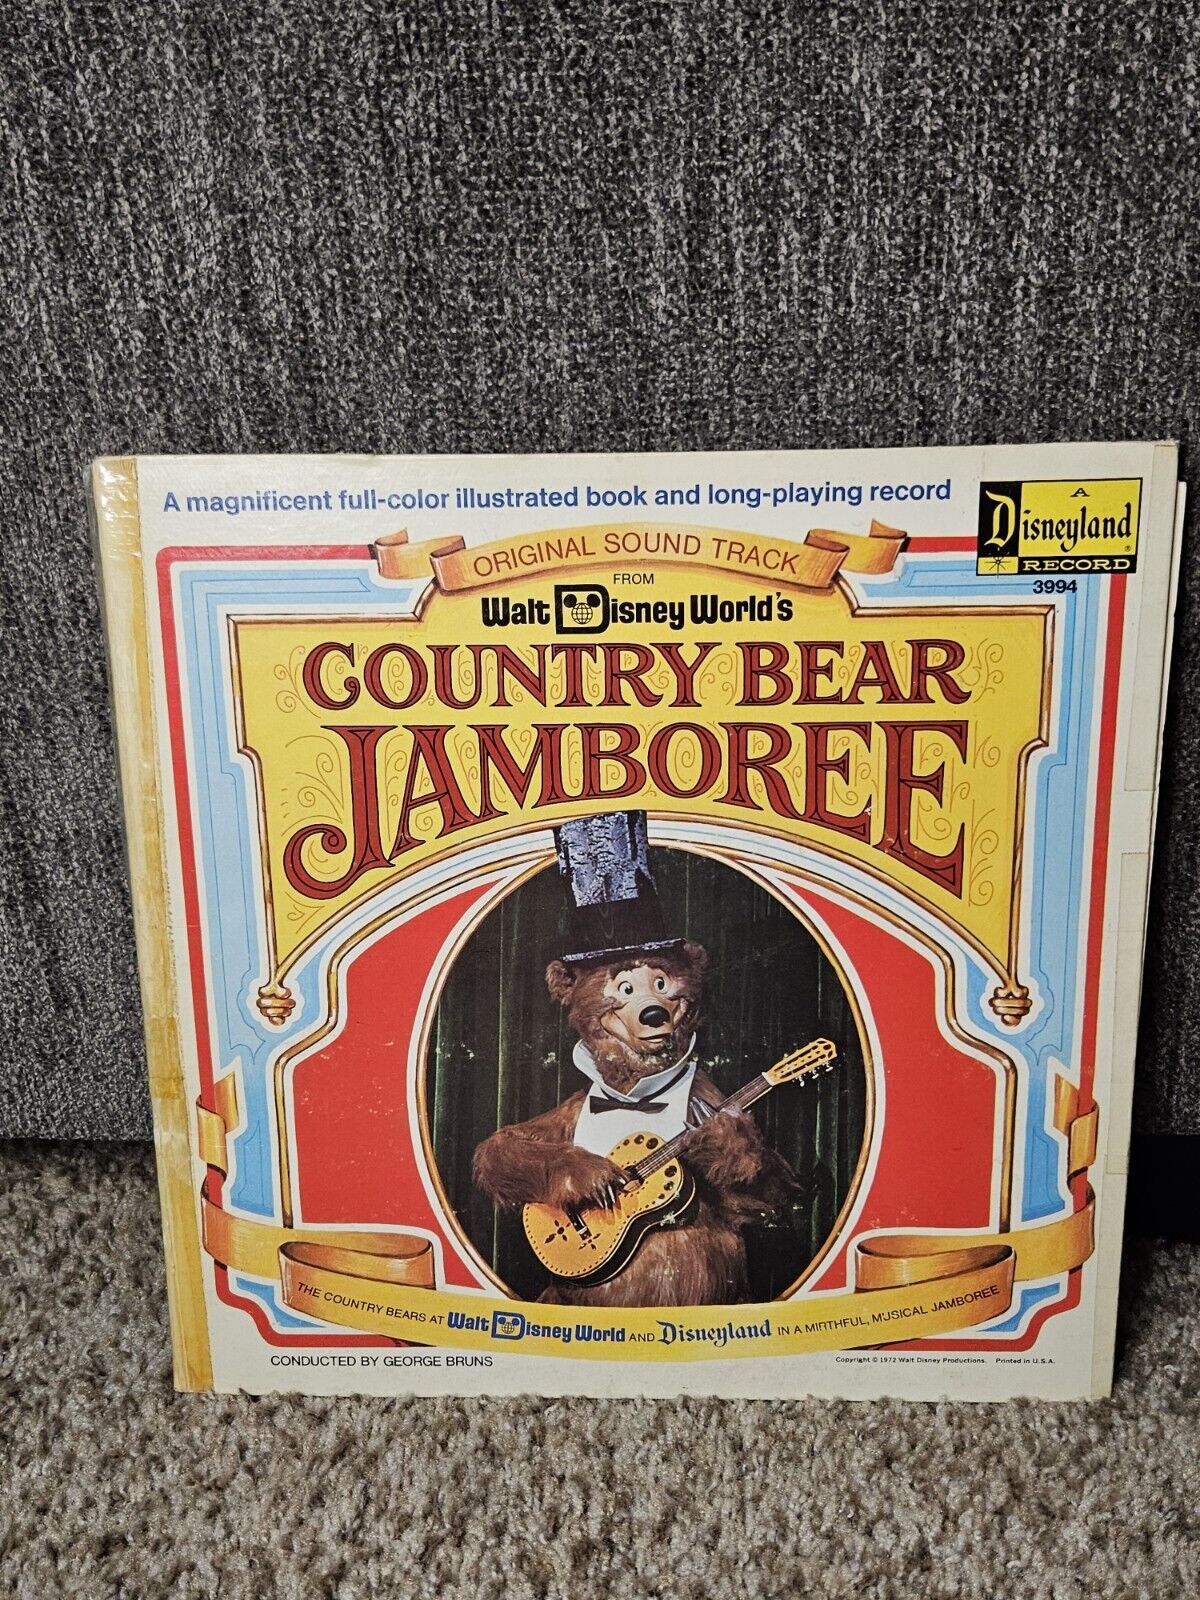 1972 Walt Disney World's Country Bear Jamboree Album With Color Illistrated Book